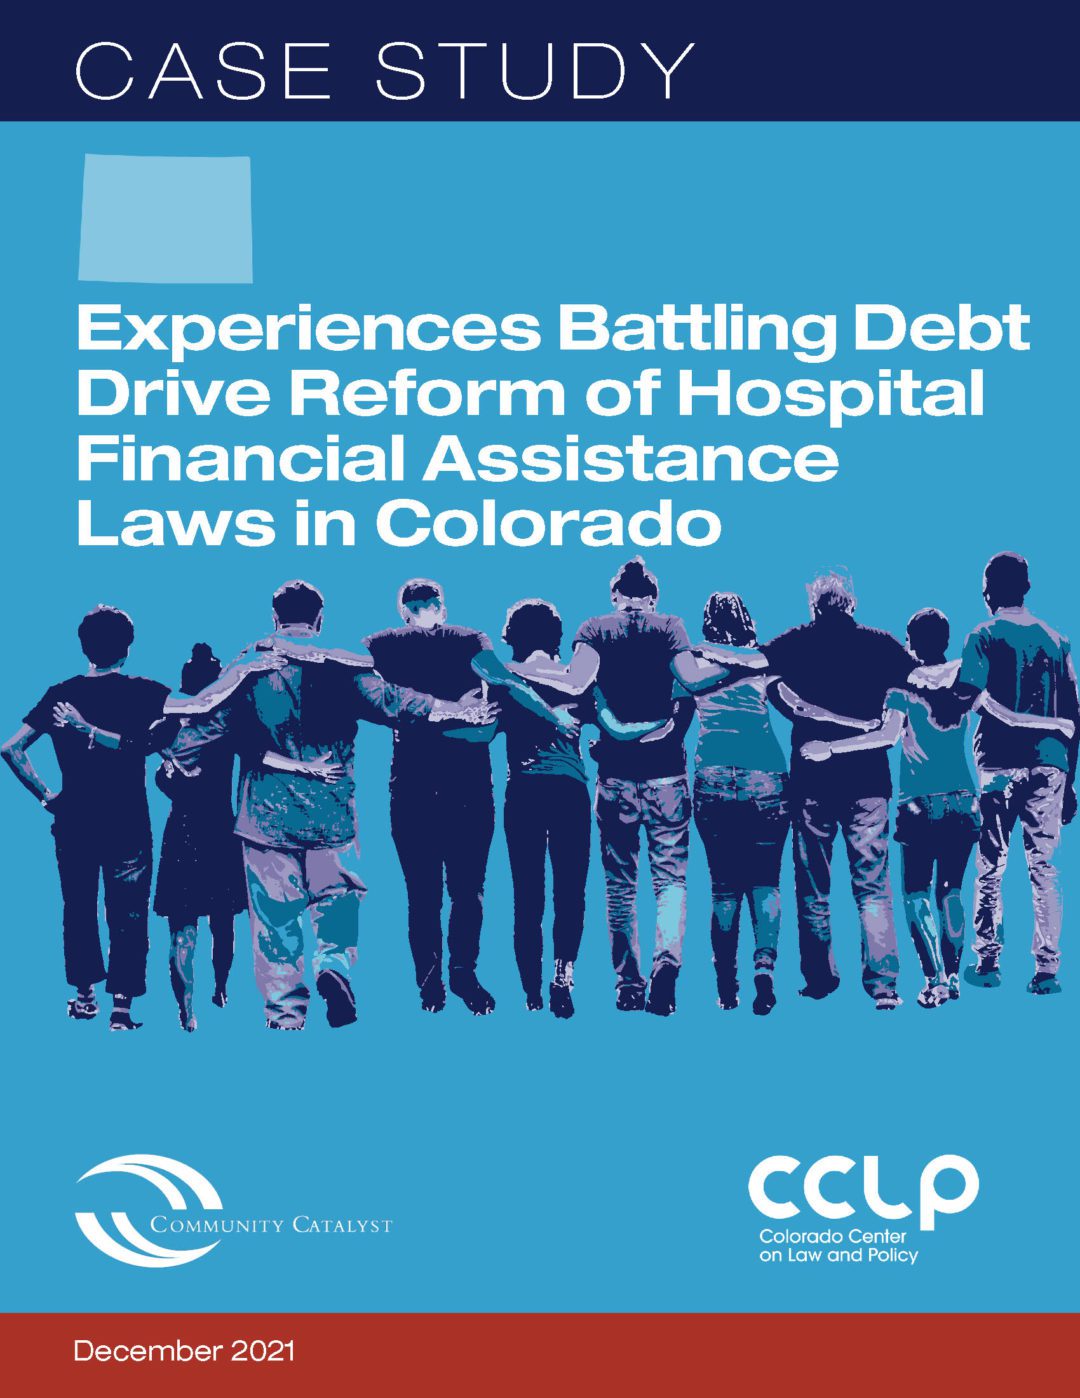 Case Study: Experiences battling debt drive reform of hospital financial assistance laws in Colorado